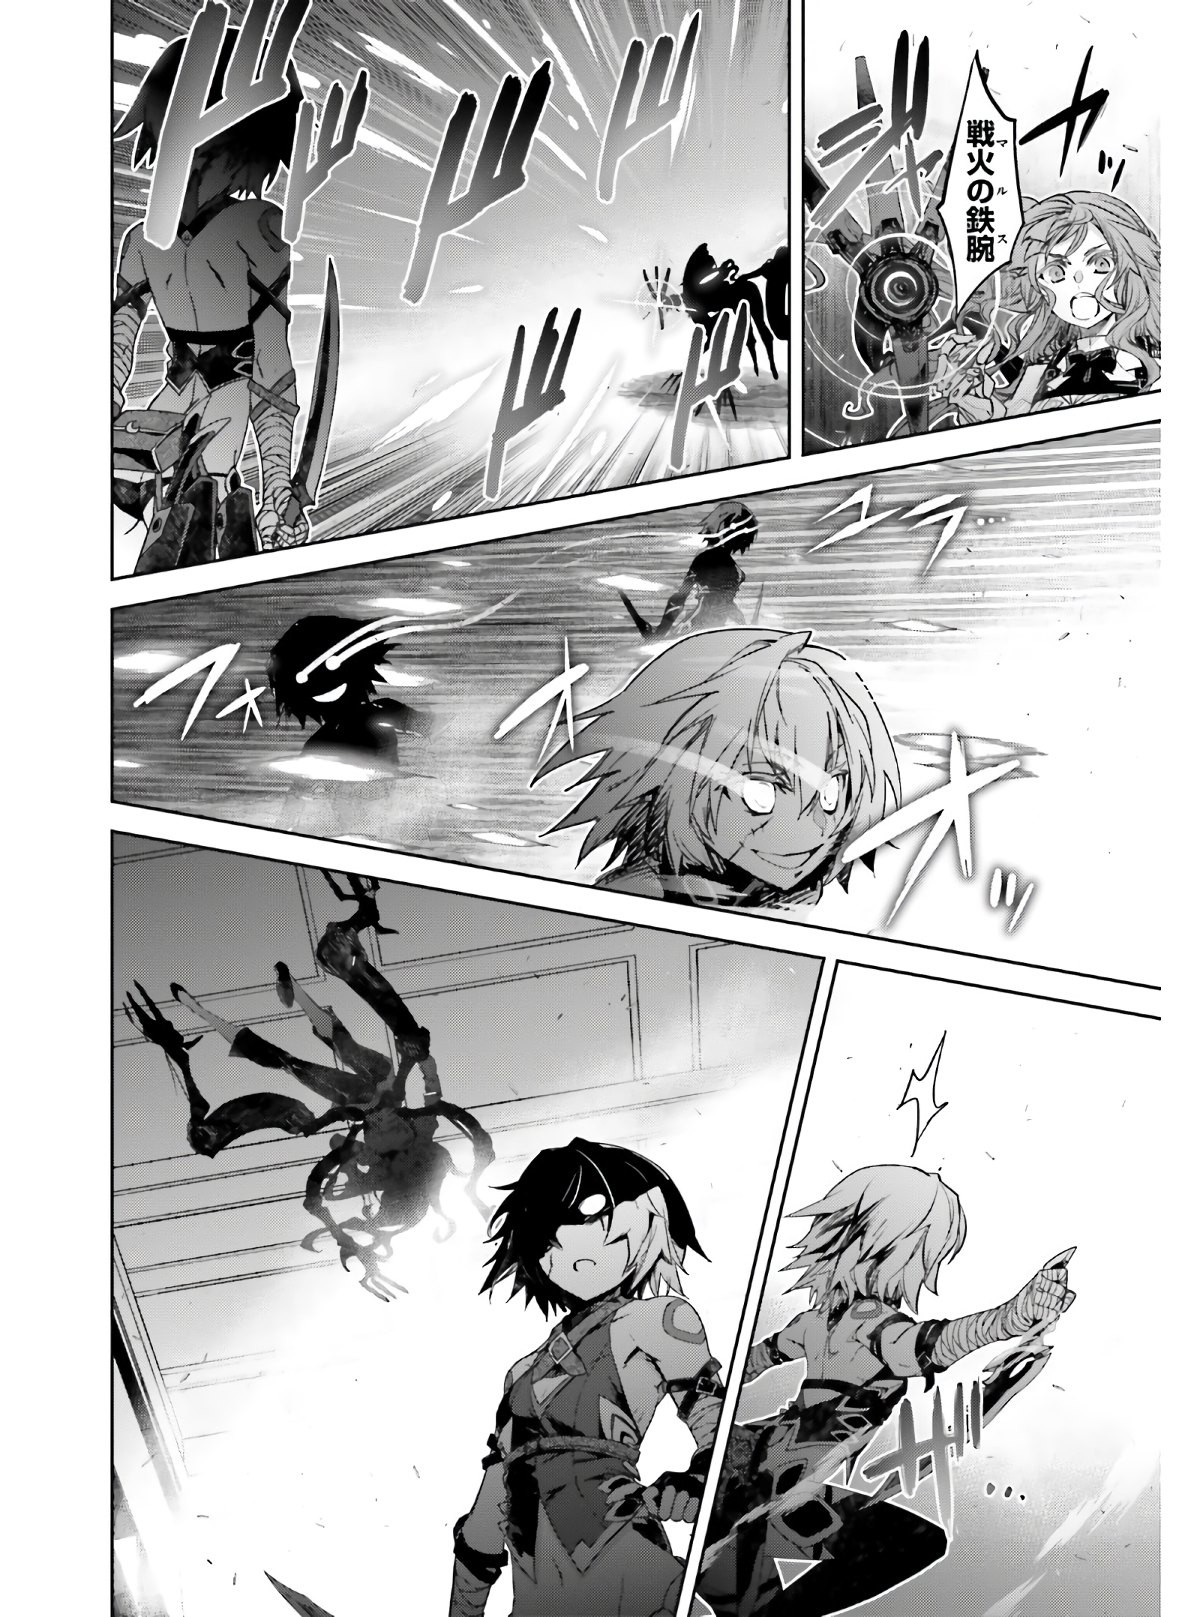 Fate-Apocrypha - Chapter 45-2 - Page 4